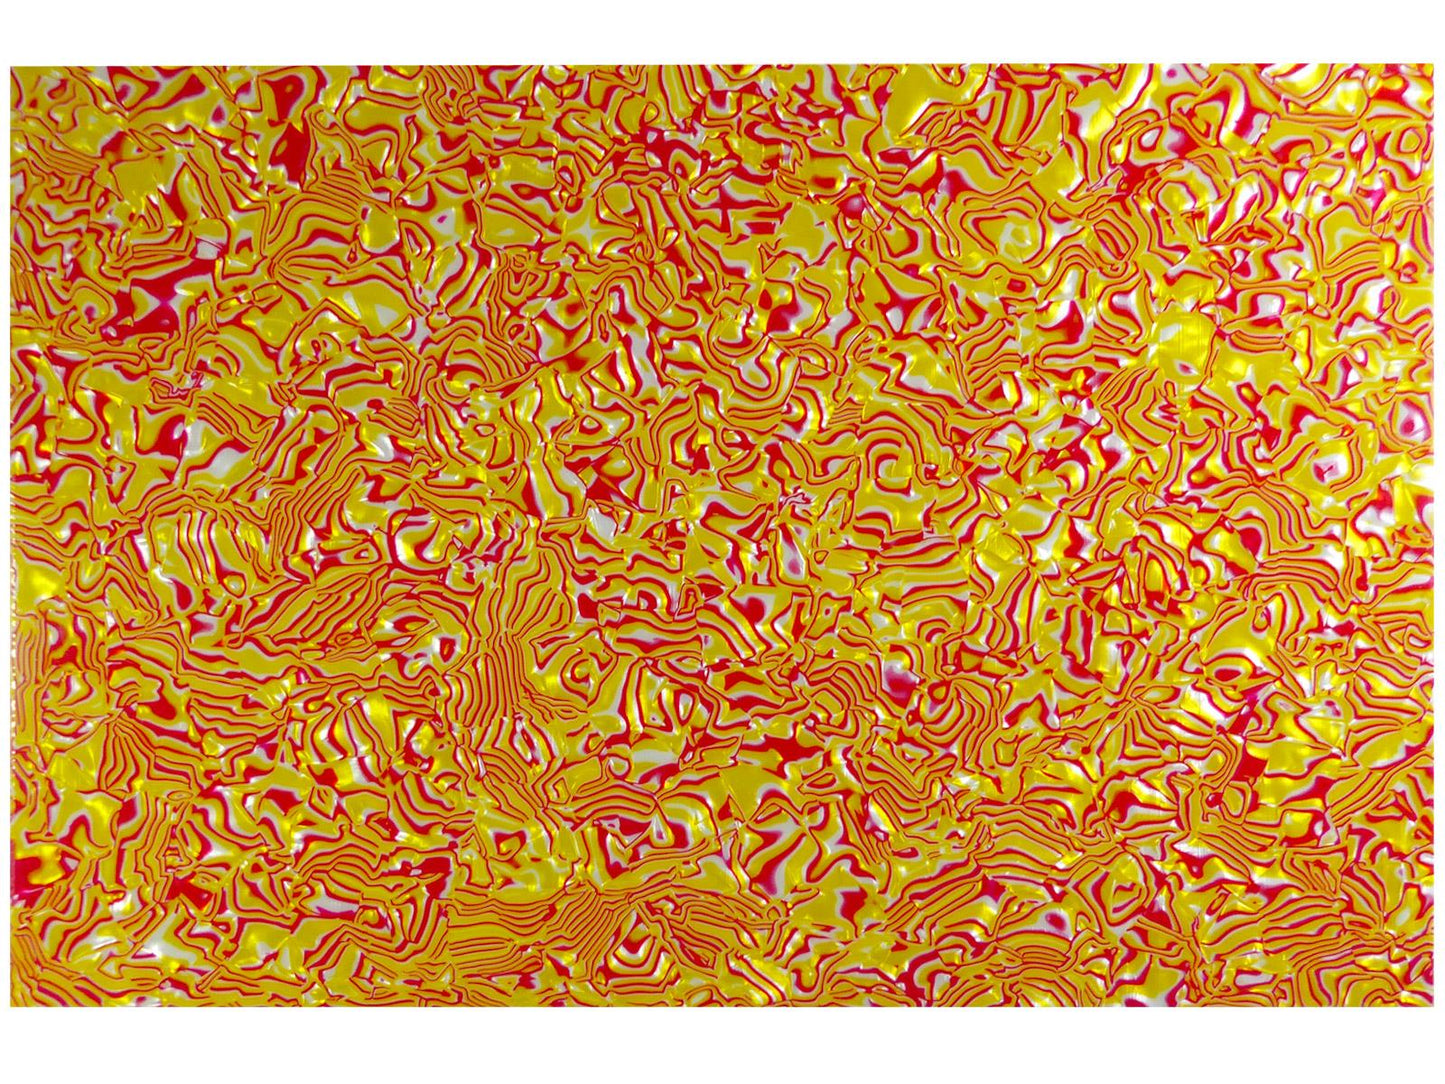 Borderlands Red and Yellow Shell PVC Sheet - 430x290x2.5mm (16.9x11.42x0.1"), 4-Ply